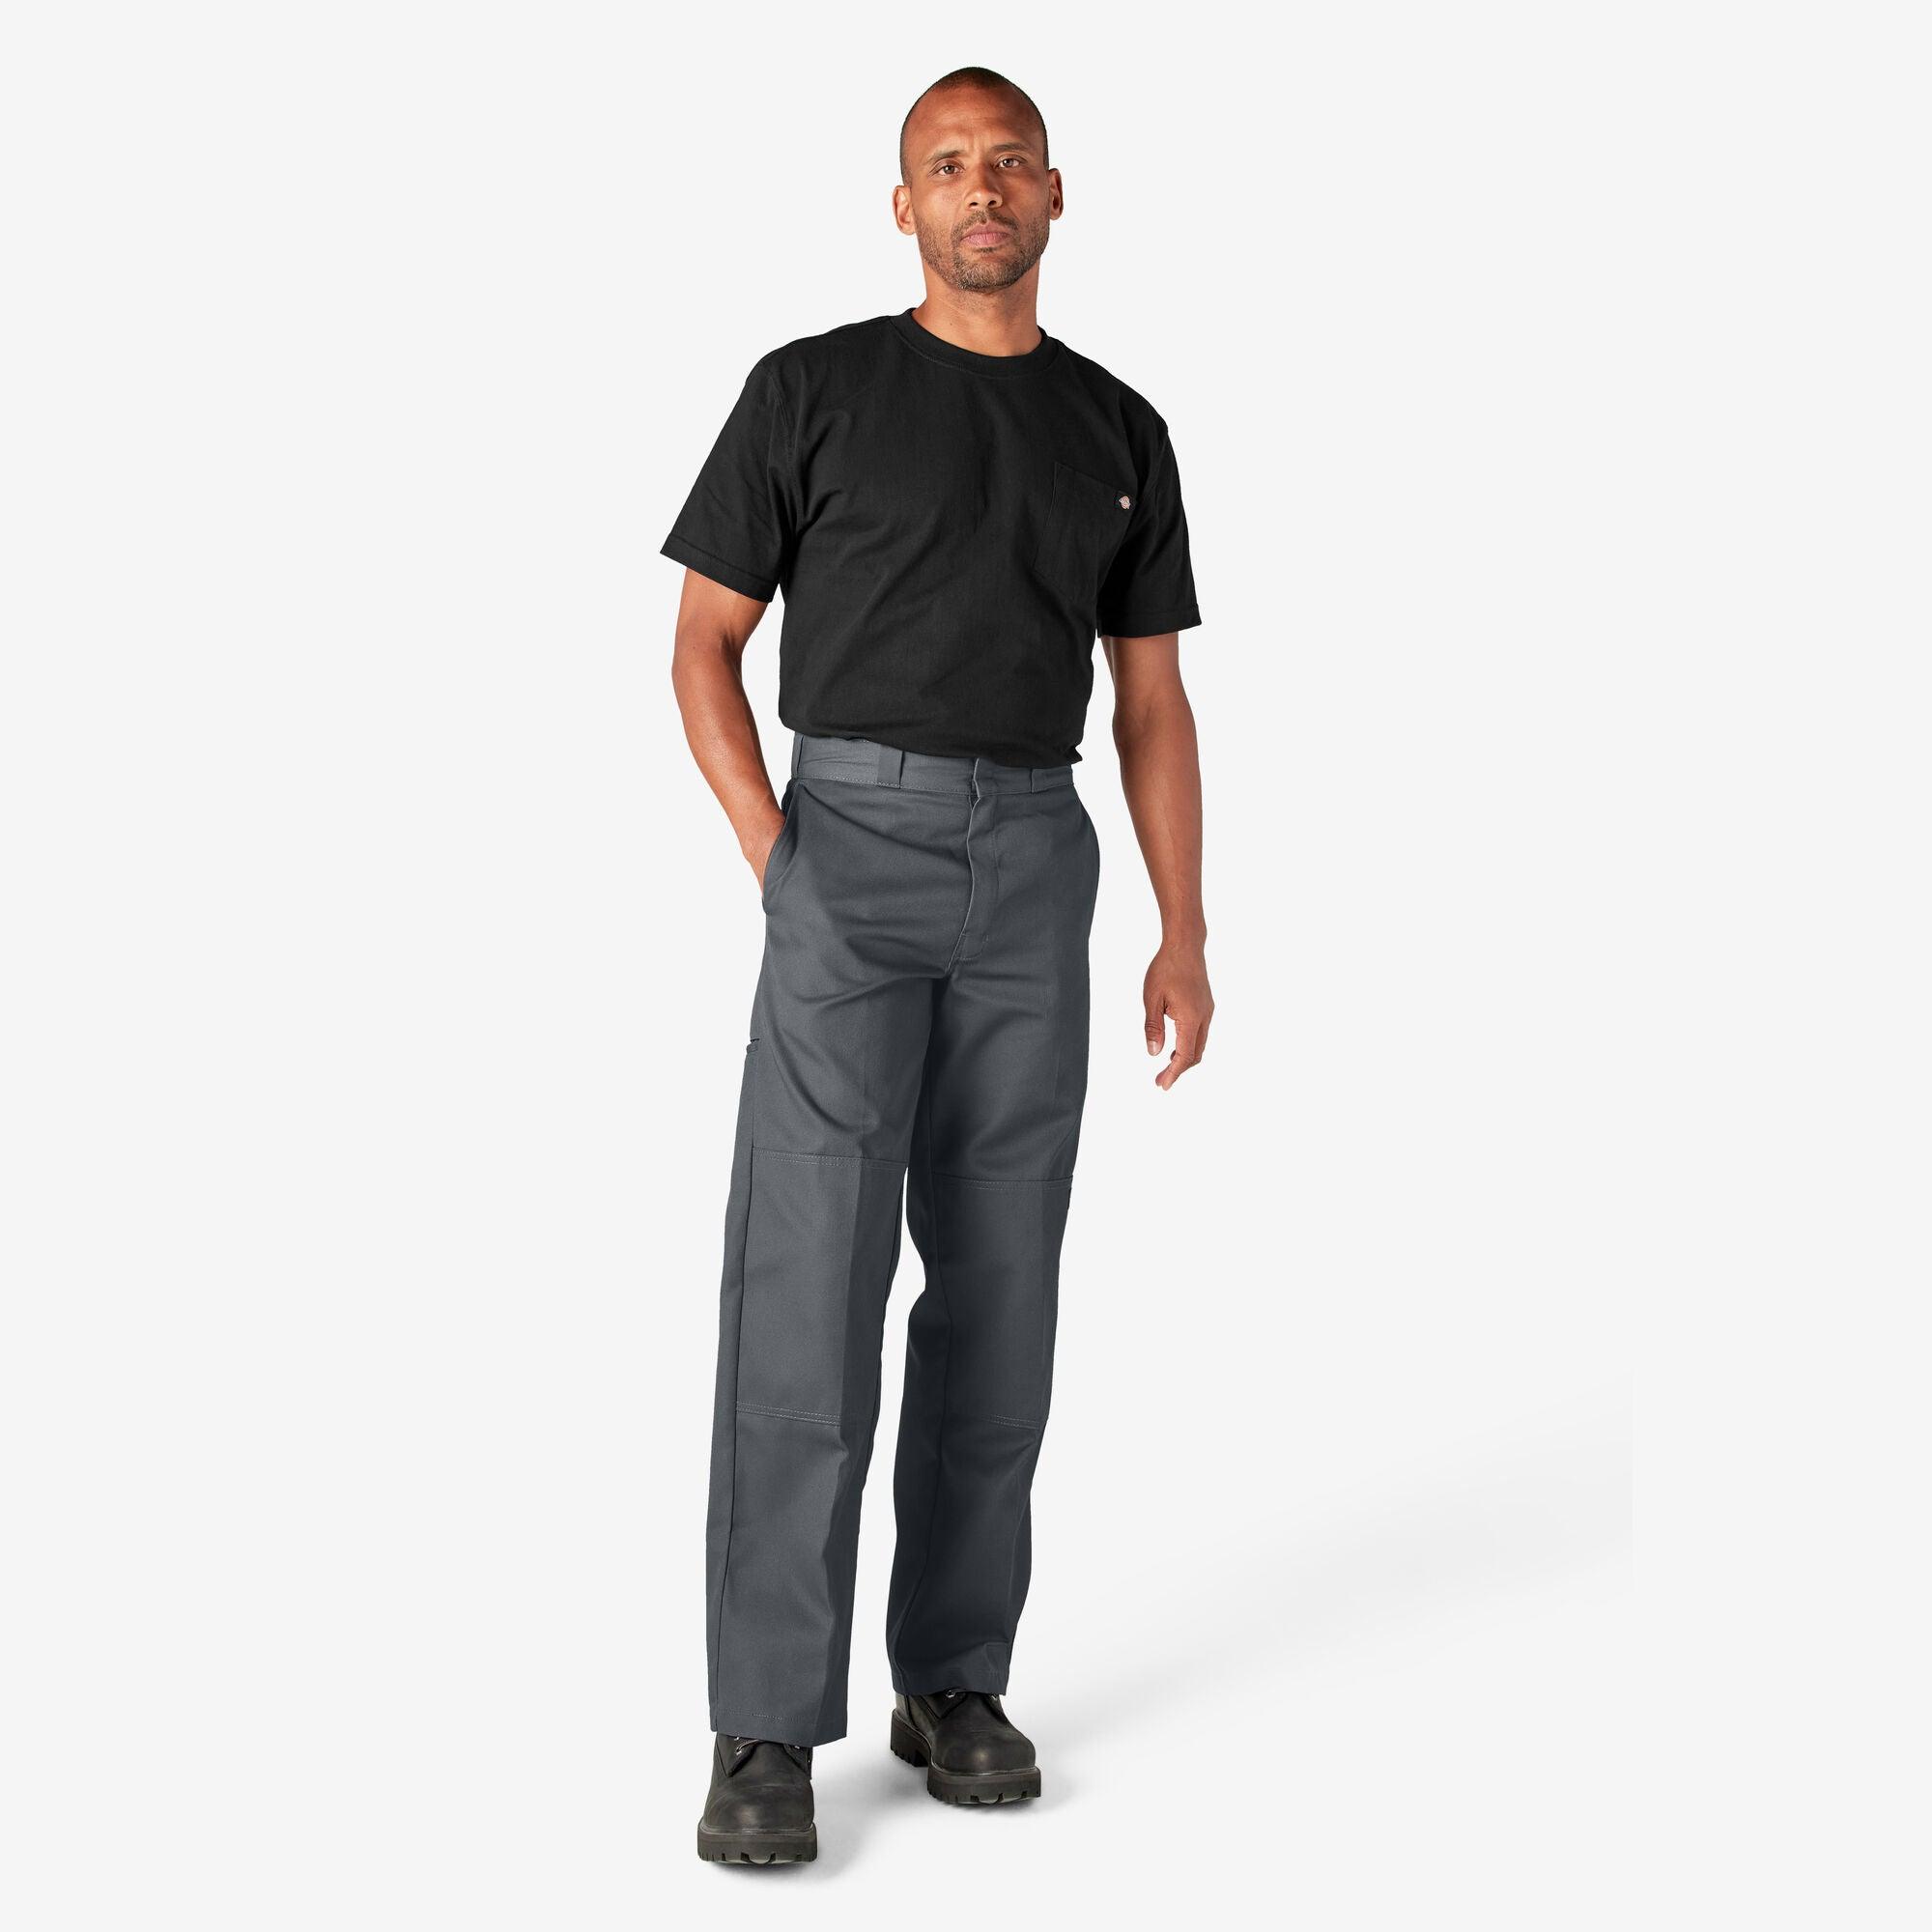 Loose Fit Double Knee Work Pants, Charcoal Gray - Purpose-Built / Home of the Trades